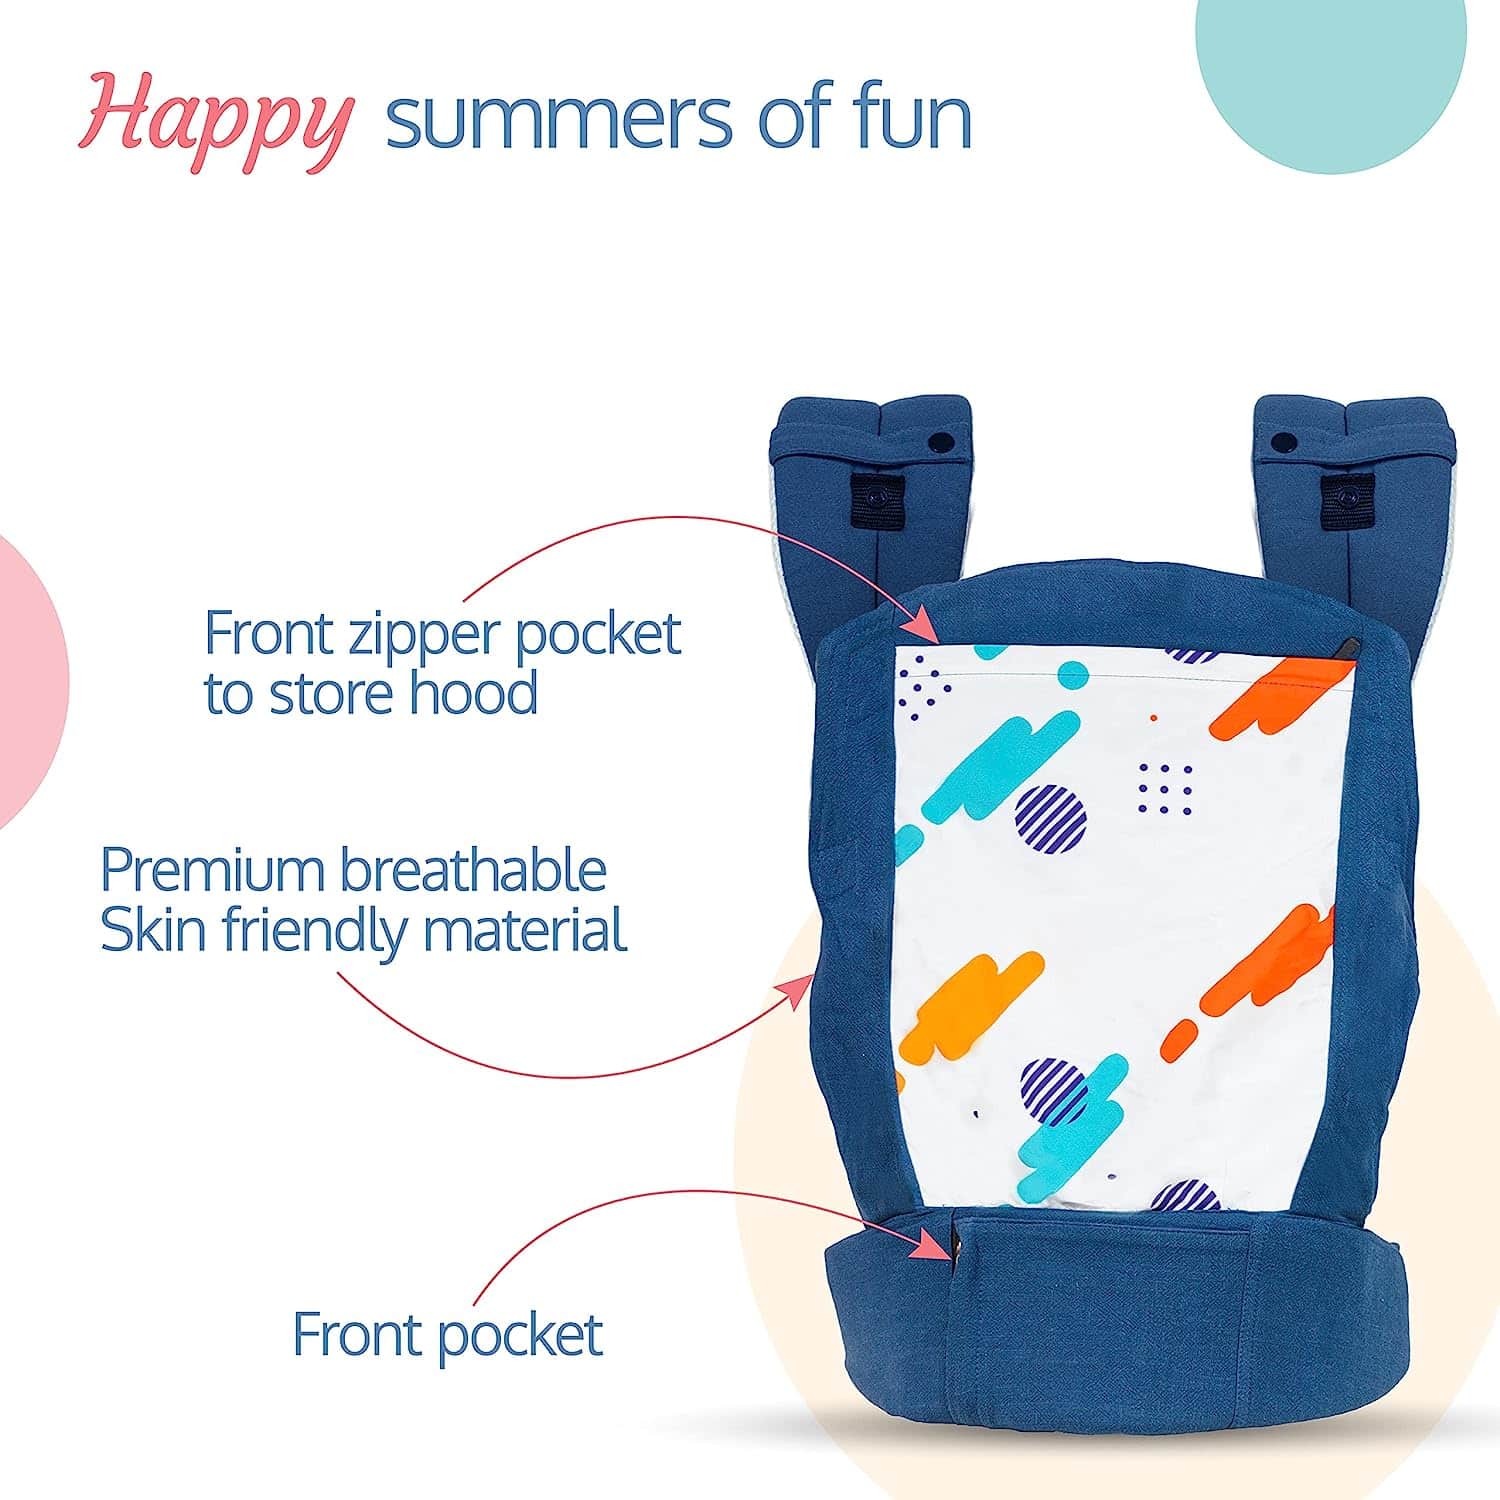 LuvLap-Adore-Baby-Carrier-with-2-carry-positions-Baby-carrier-for-4-to-24-months-baby-Breathable-Skin-friendly-premium-fabric-Adjustable-New-born-to-Toddler-Carrier-Max-weight-Up-to-18-Kgs-Blue